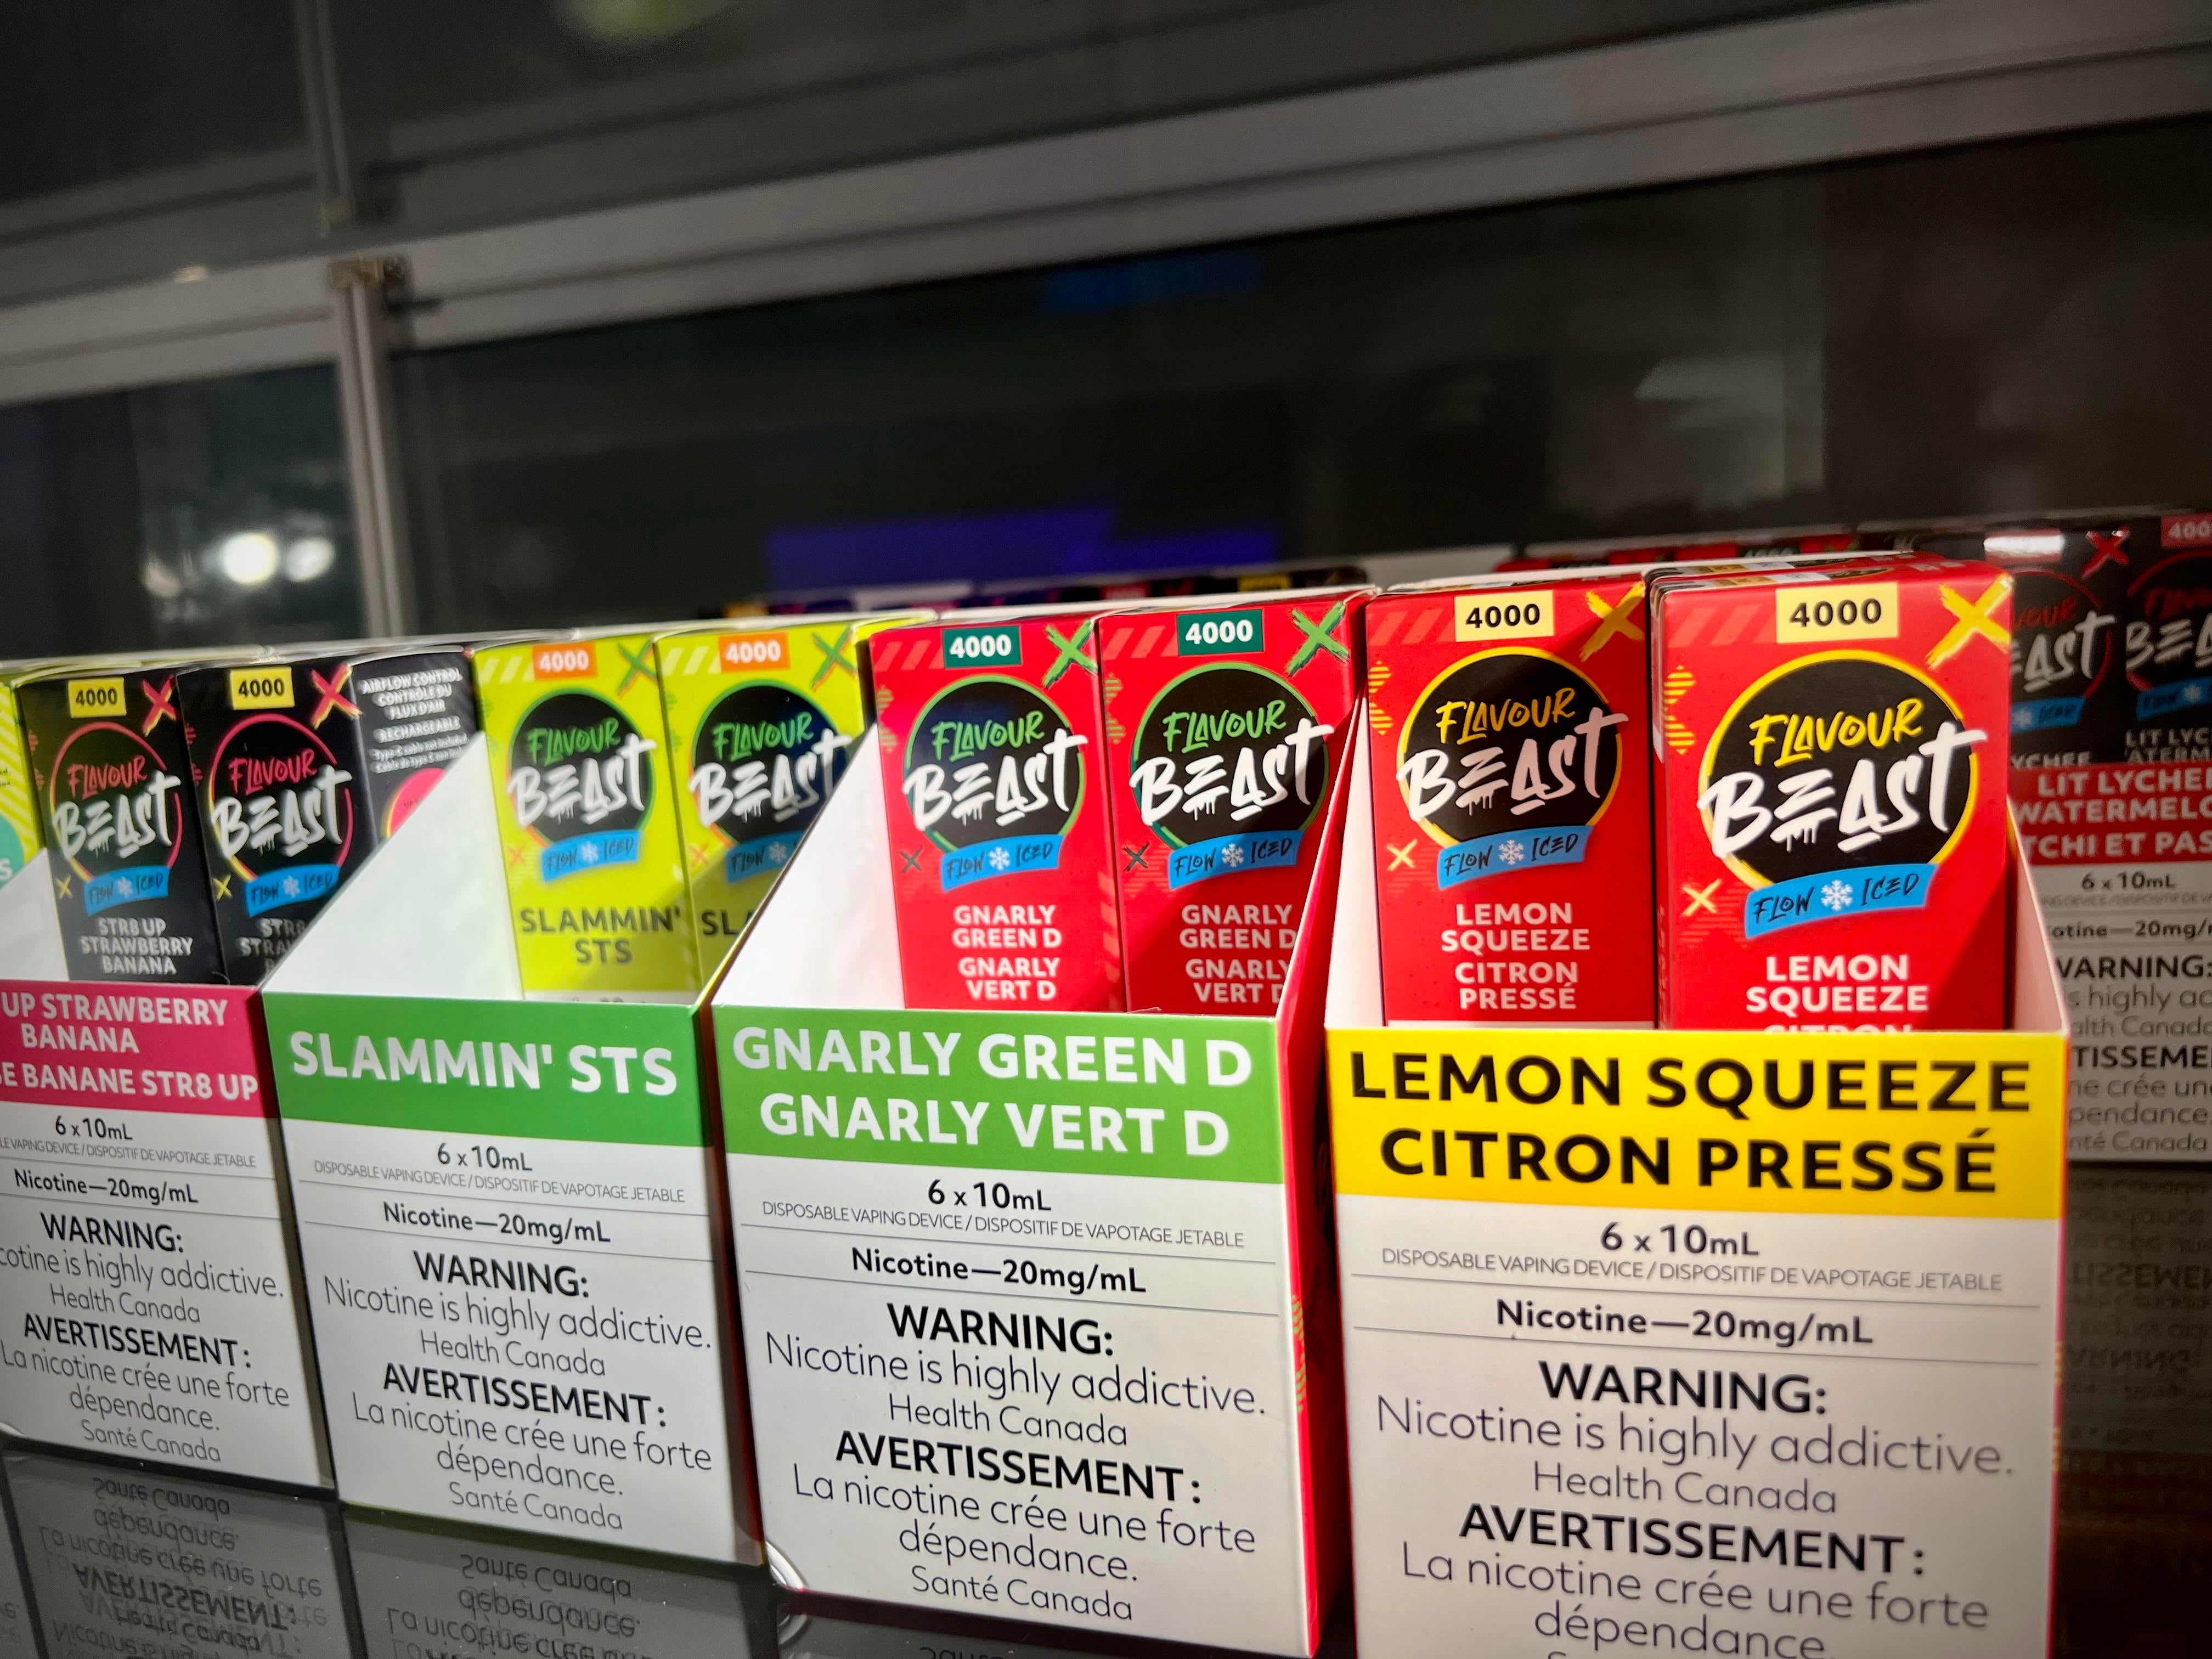 Benefits of Using Flavour Beast Disposable Vapes